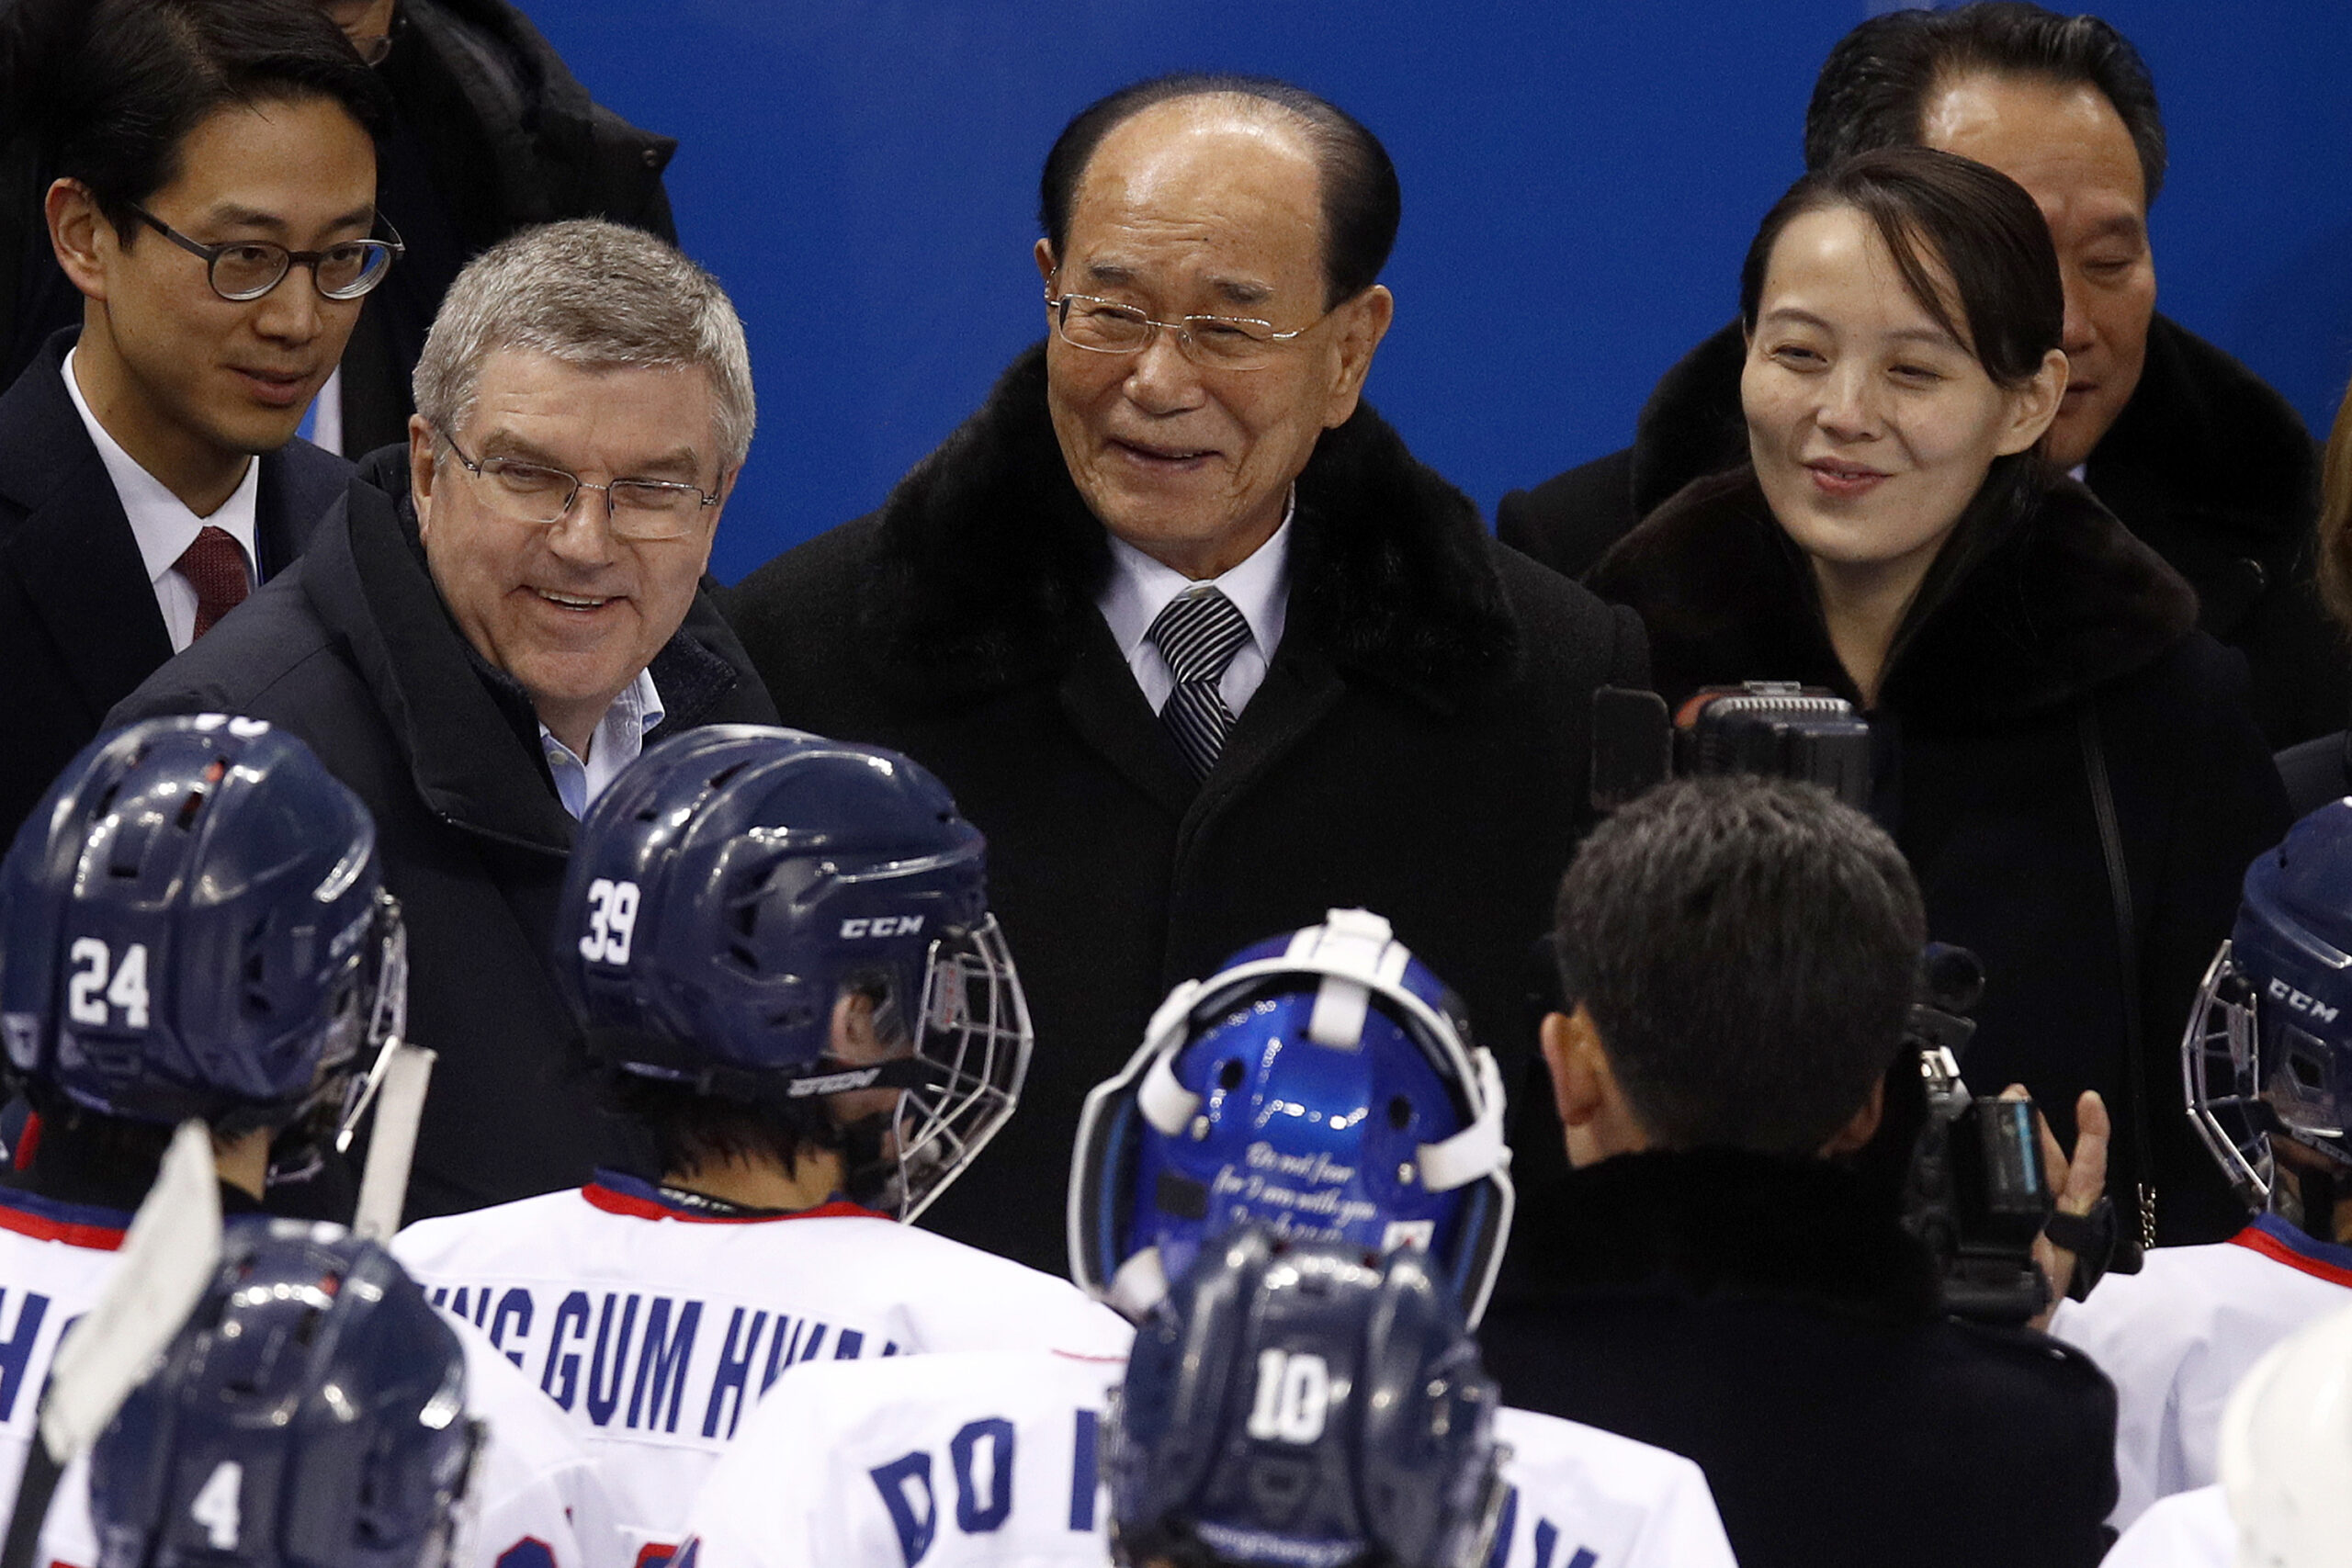 FILE - In this Feb. 10, 2018, file photo, IOC president Thomas Bach, second from left, and Kim Yo Jong, right, sister of North Korean leader Kim Jong Un, talks with players after the preliminary round of the women's hockey game between Switzerland and the combined Koreas at the 2018 Winter Olympics in Gangneung, South Korea. Photo: Jae C. Hong / AP File